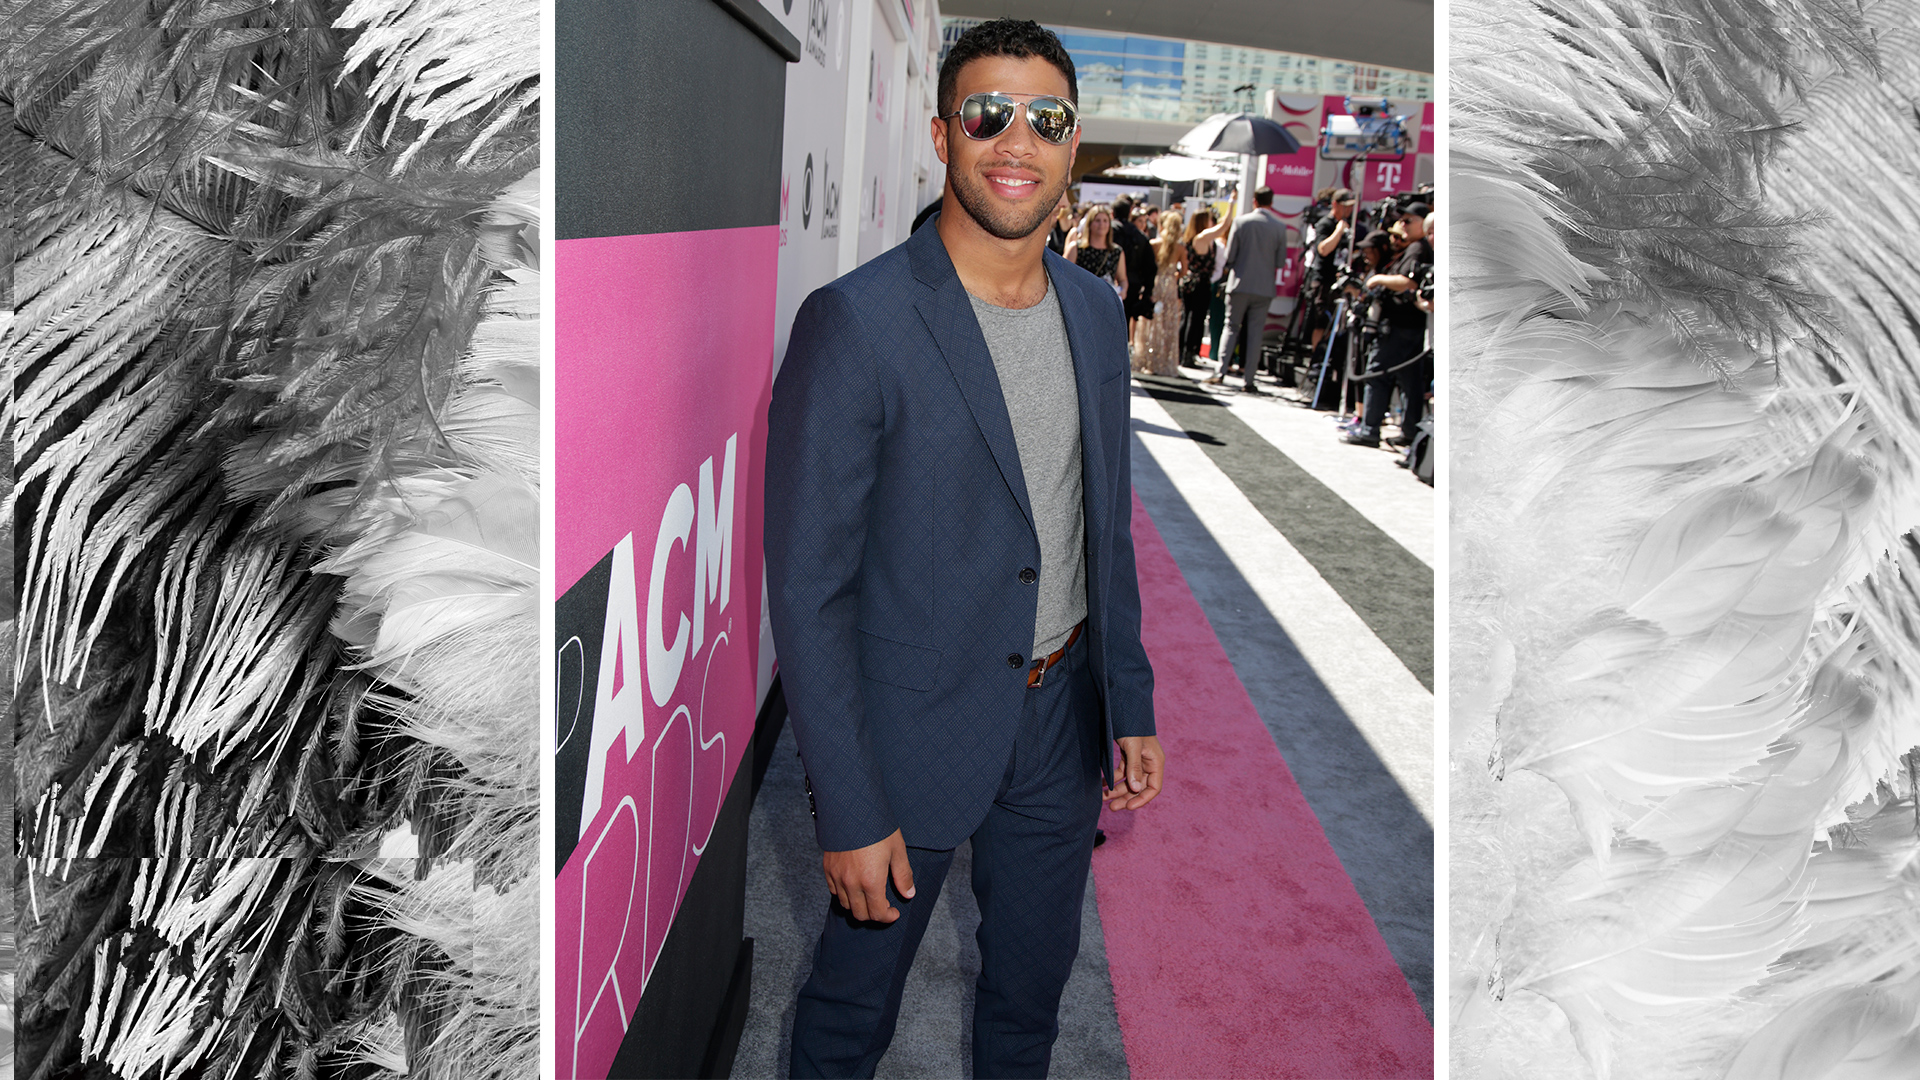 NASCAR driver Bubba Wallace keeps it cool in aviator sunglasses and a crewneck tee.